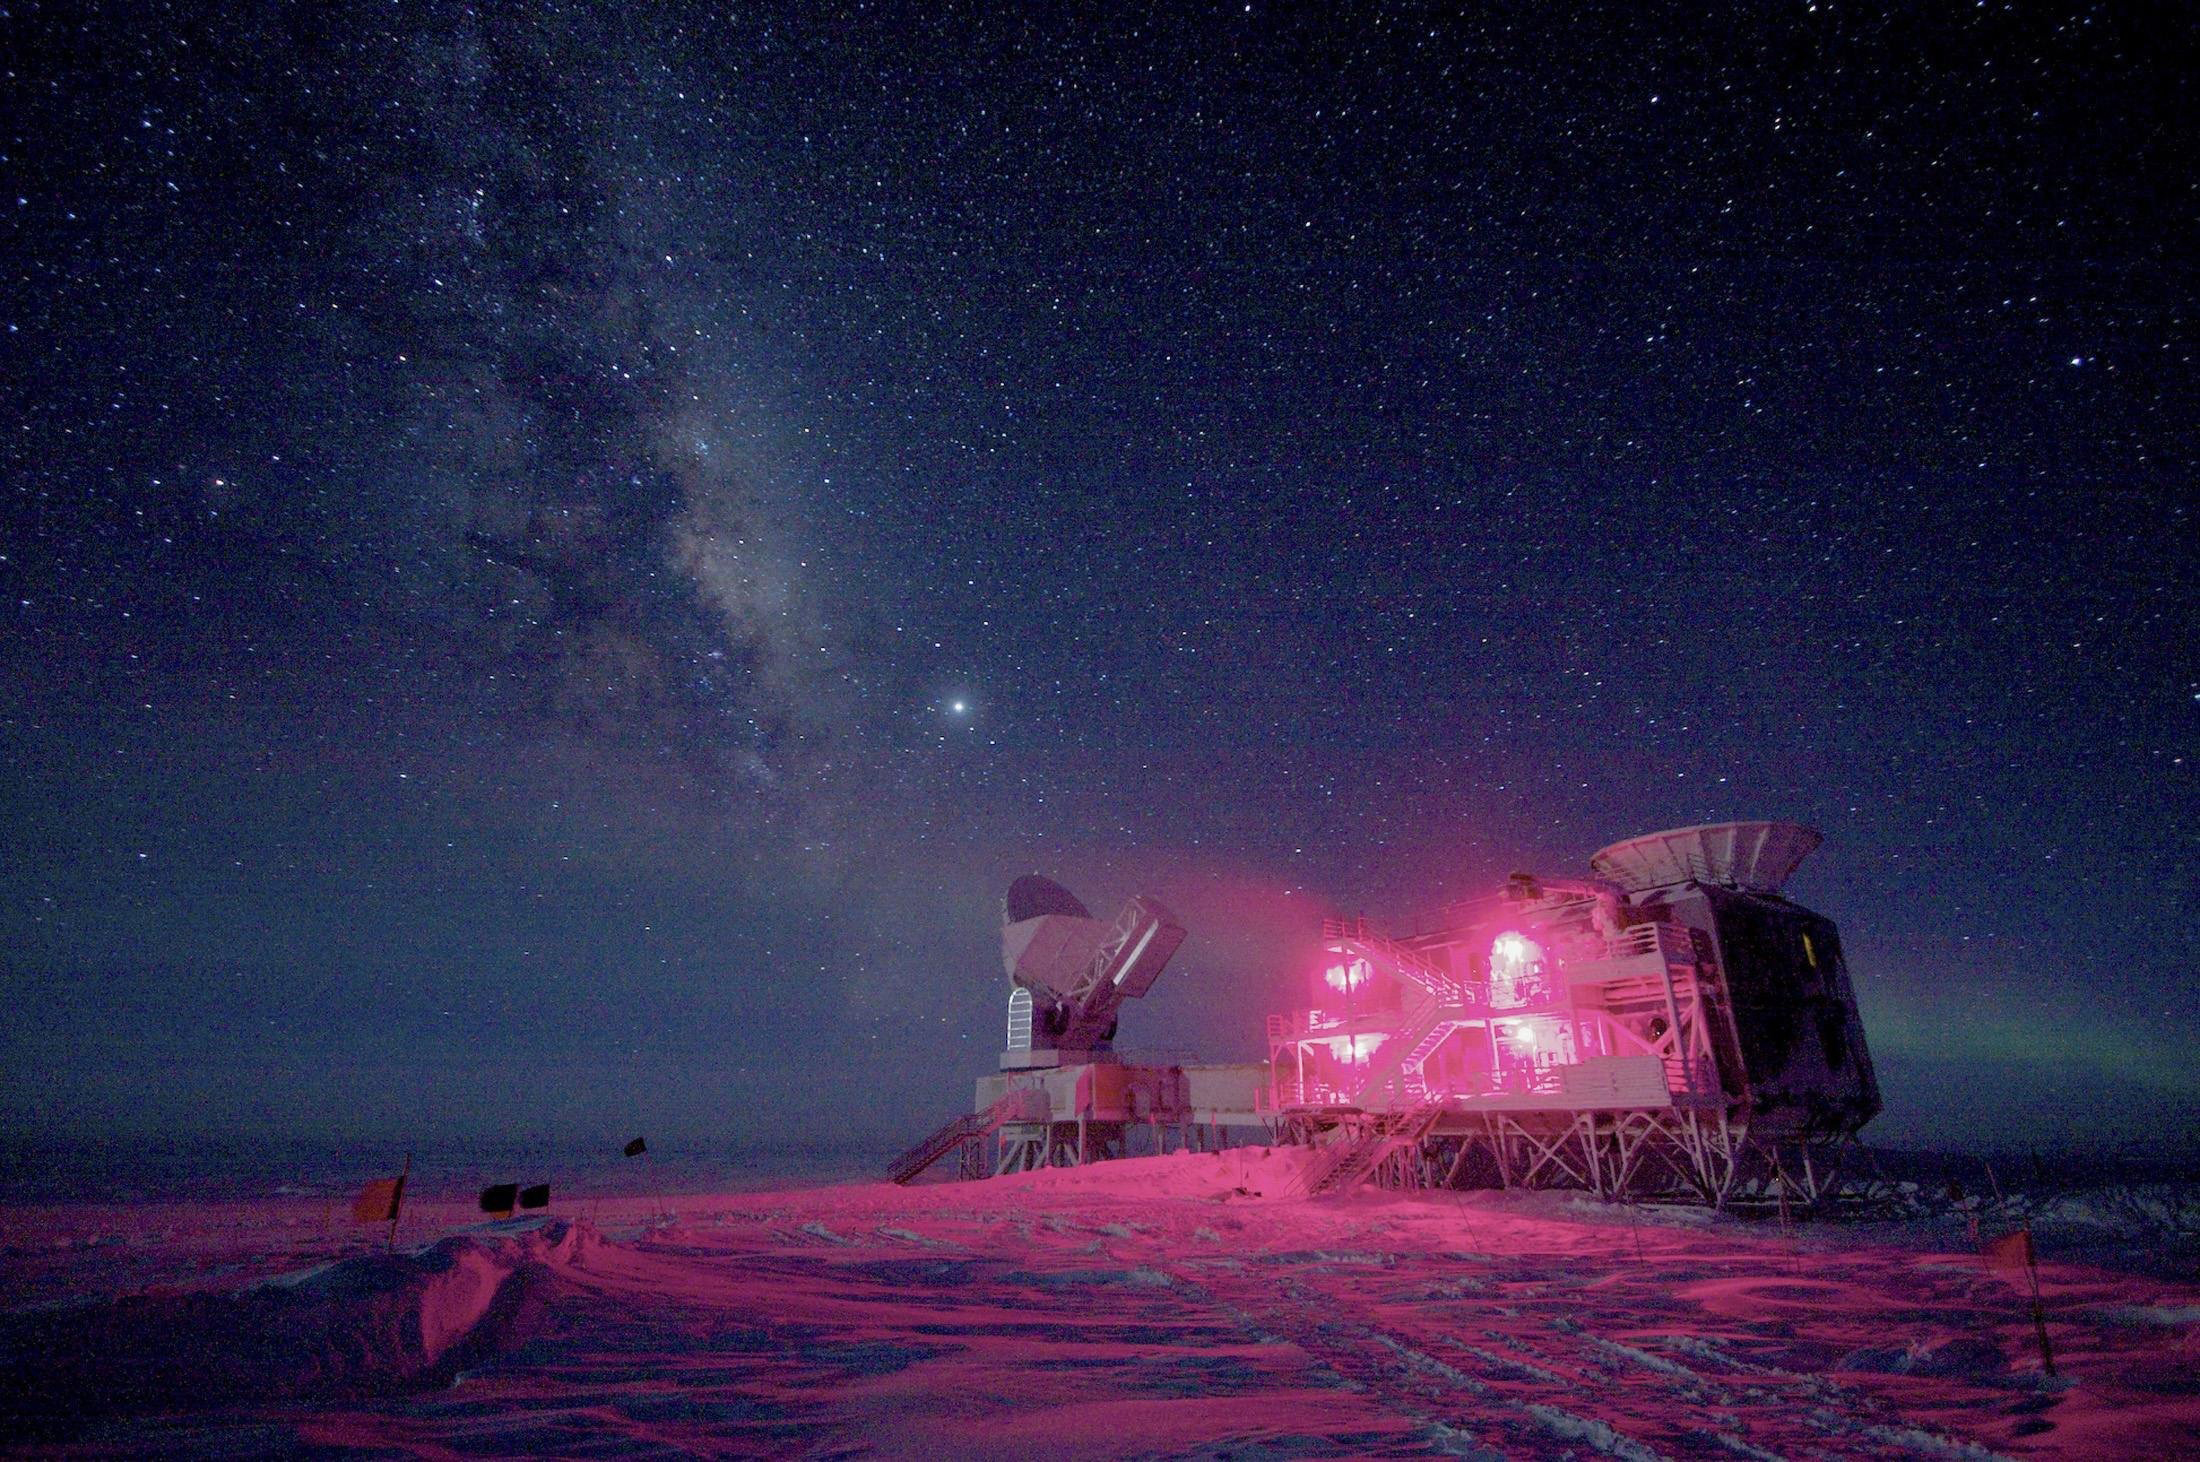 Big Bang, The South Pole Telescope and the BICEP Telescope at Amundsen-Scott South Pole Station